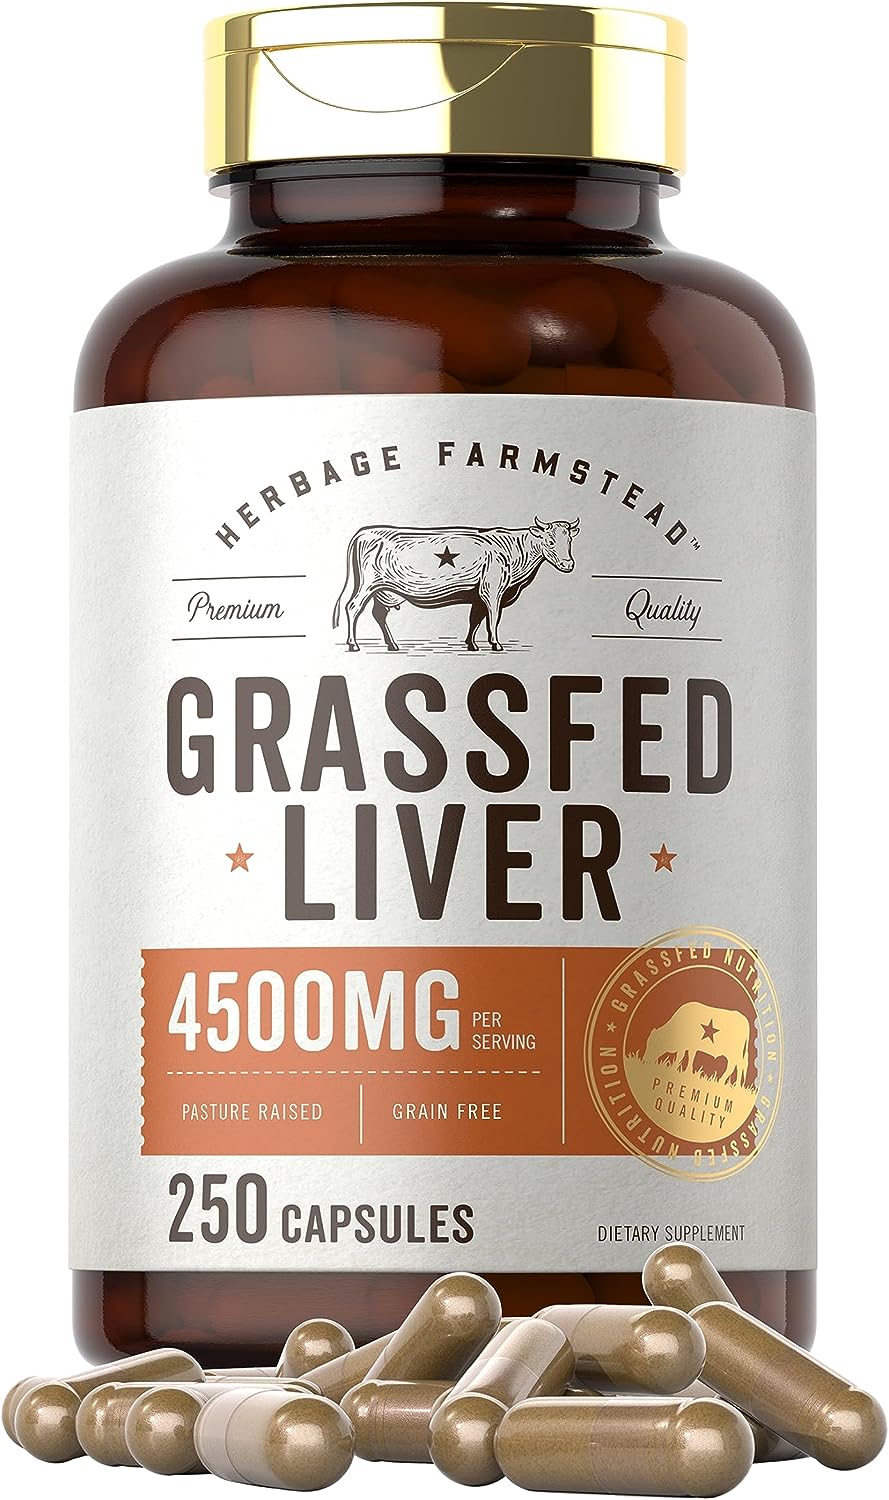 Carlyle Grass Fed Beef Liver Capsules 4500mg | 250 Count | Desiccated Supplement | Non-GMO, Gluten Free | by Herbage Farmstead